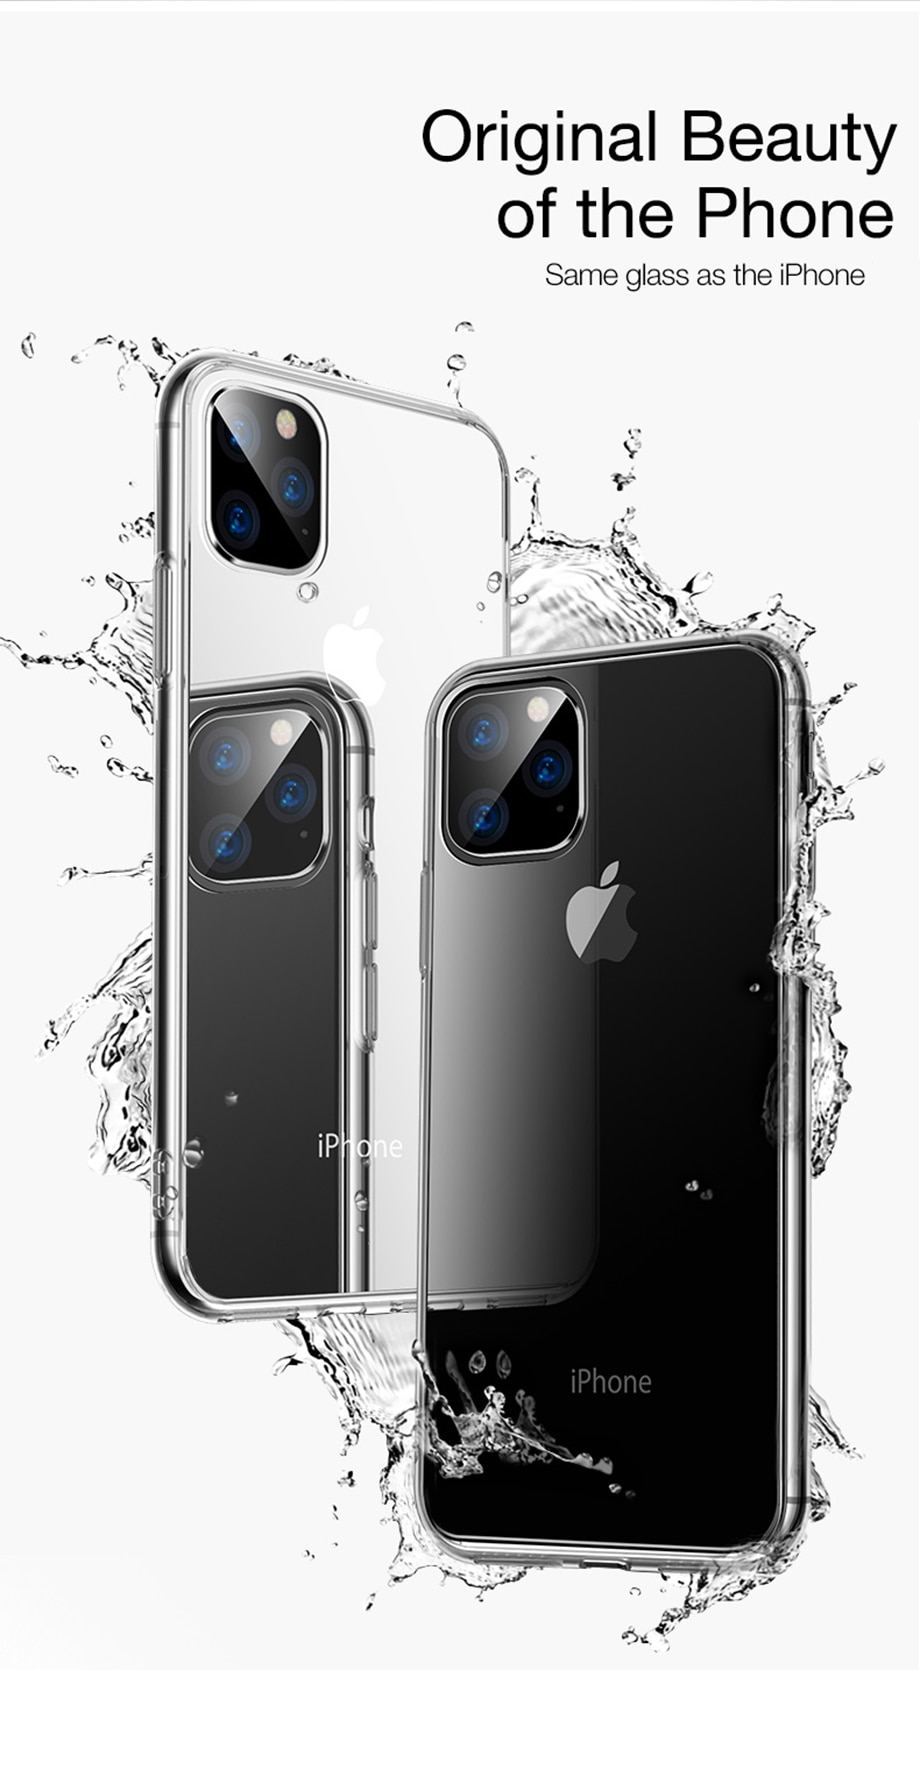 Lovebay Transparent Soft Phone Case For iPhone 11 XS X XR 11 Pro XS Max Clear Fundas For iPhone 8 7 6 6s Plus TPU Silicone Cover